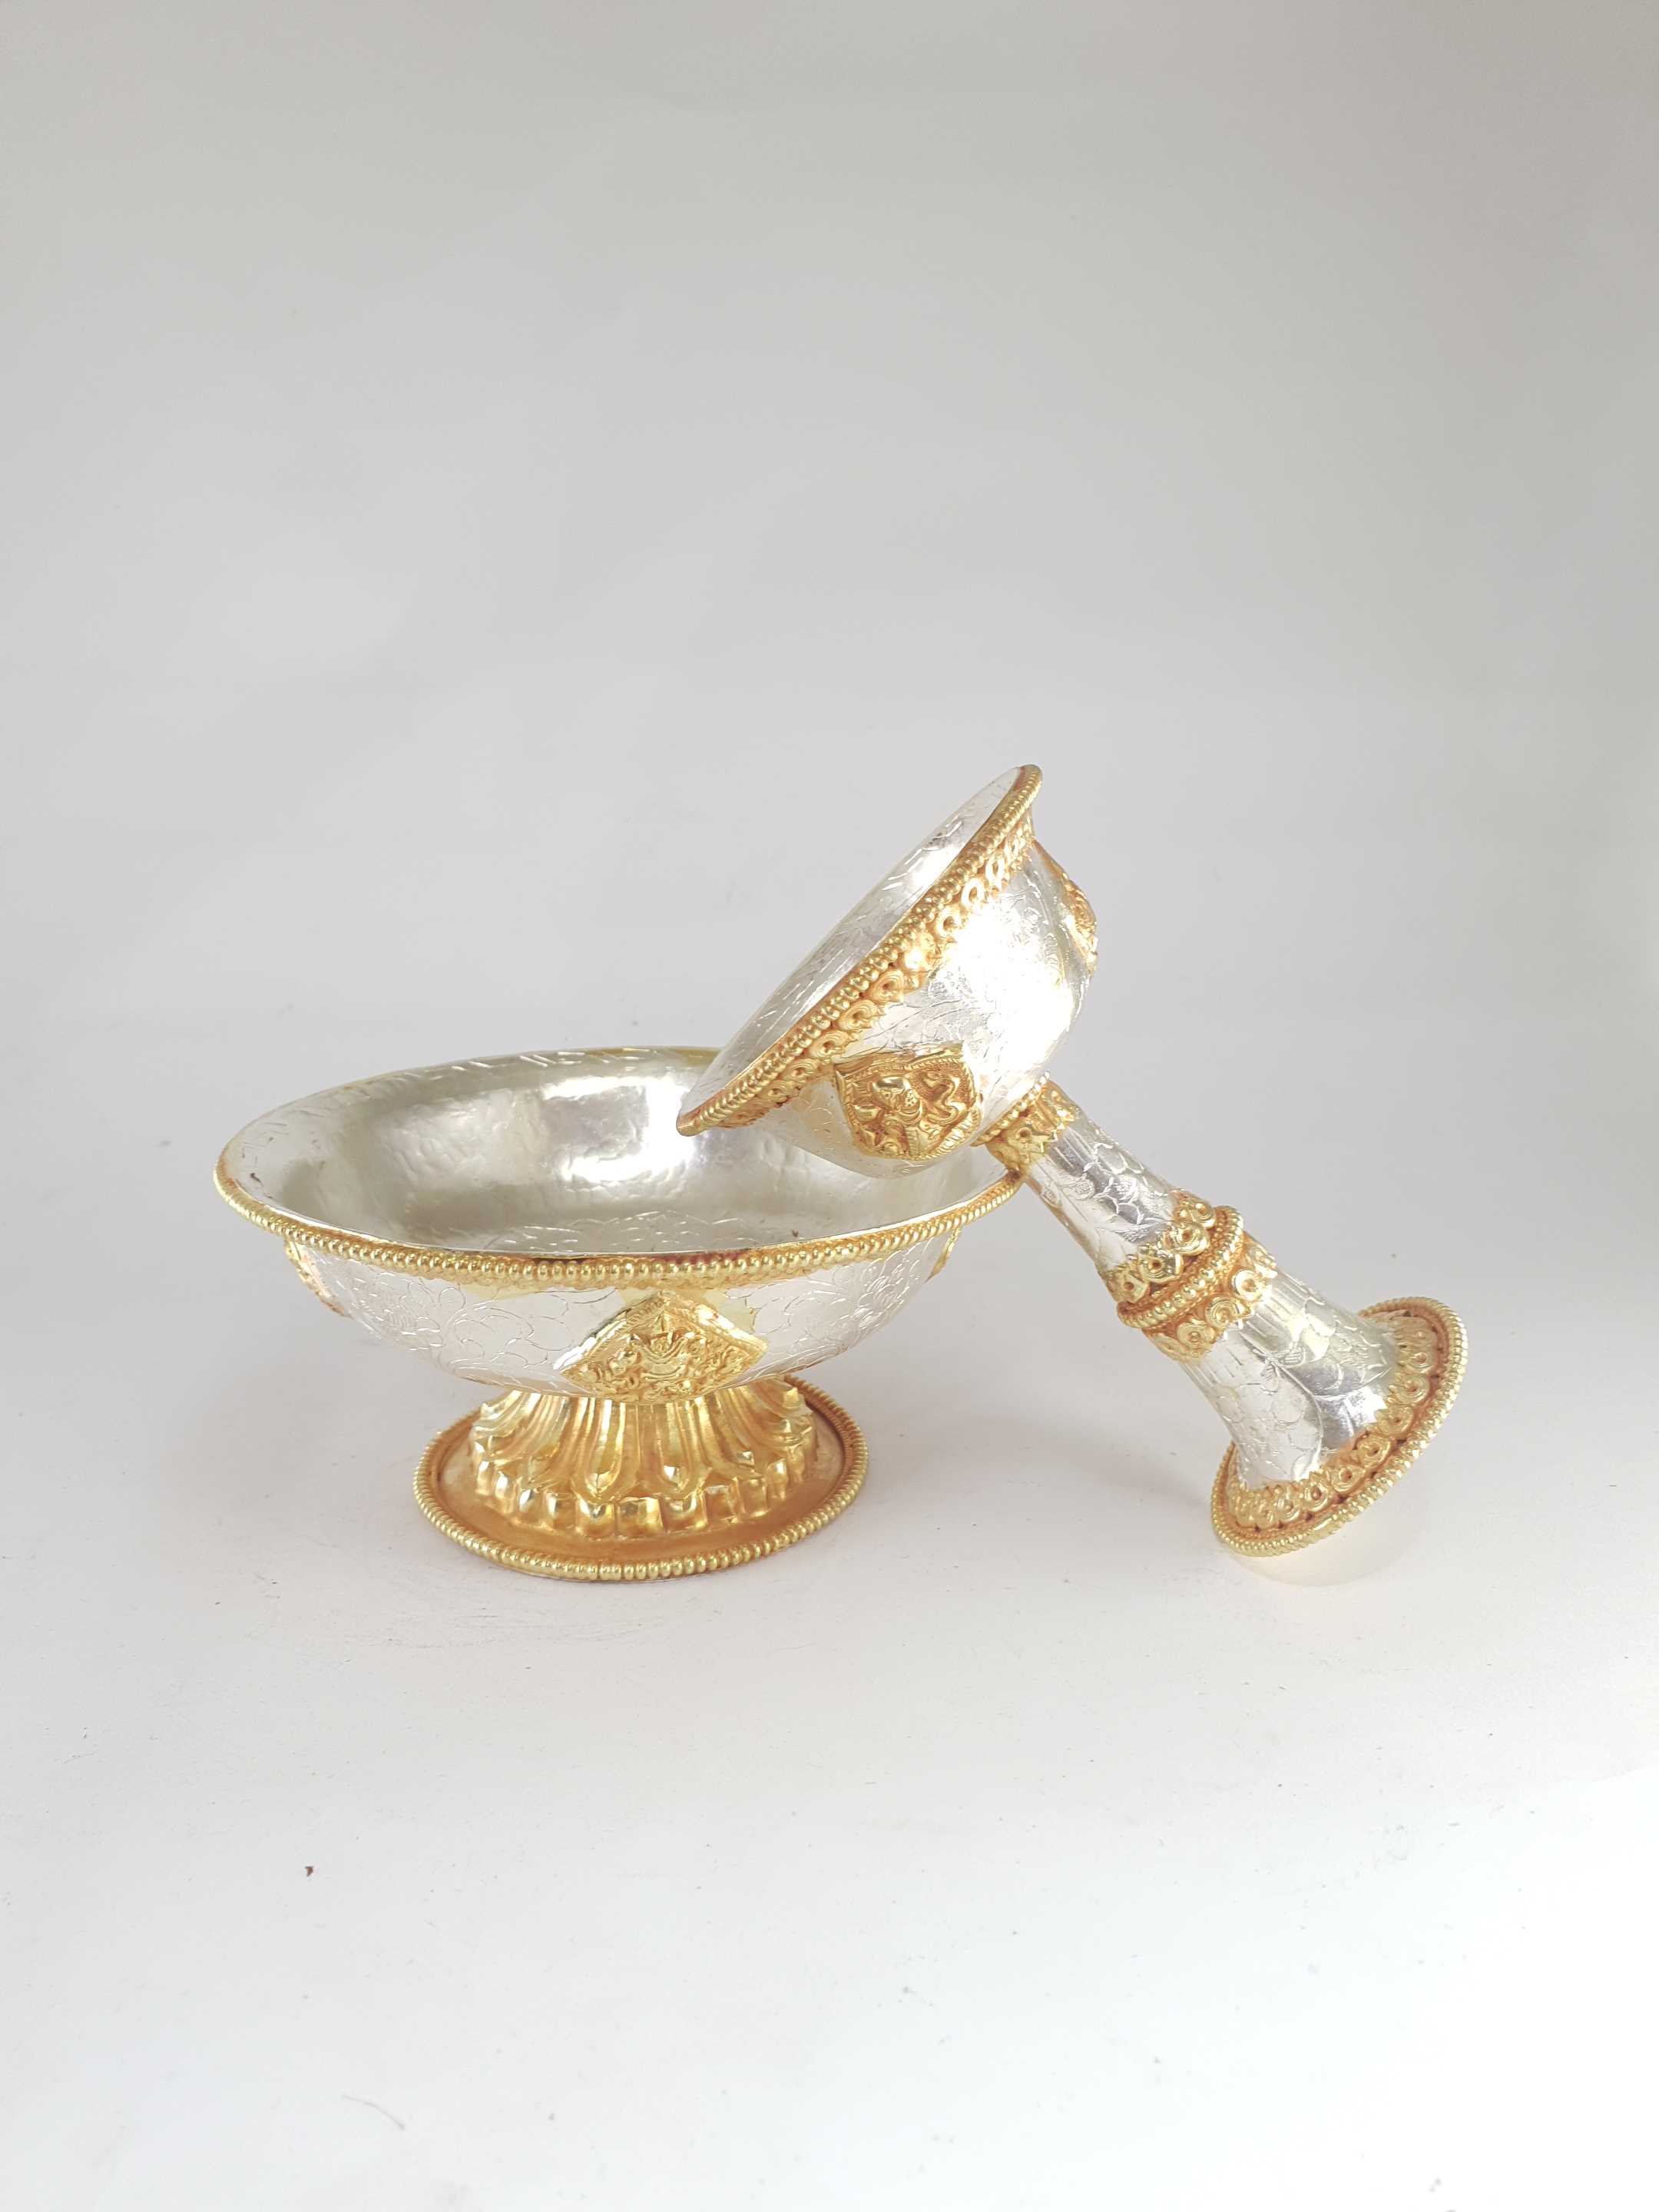 Serkyem Offering Or The Golden Drink Offering gold And Silver Plated, aka Sergem, Sirkim